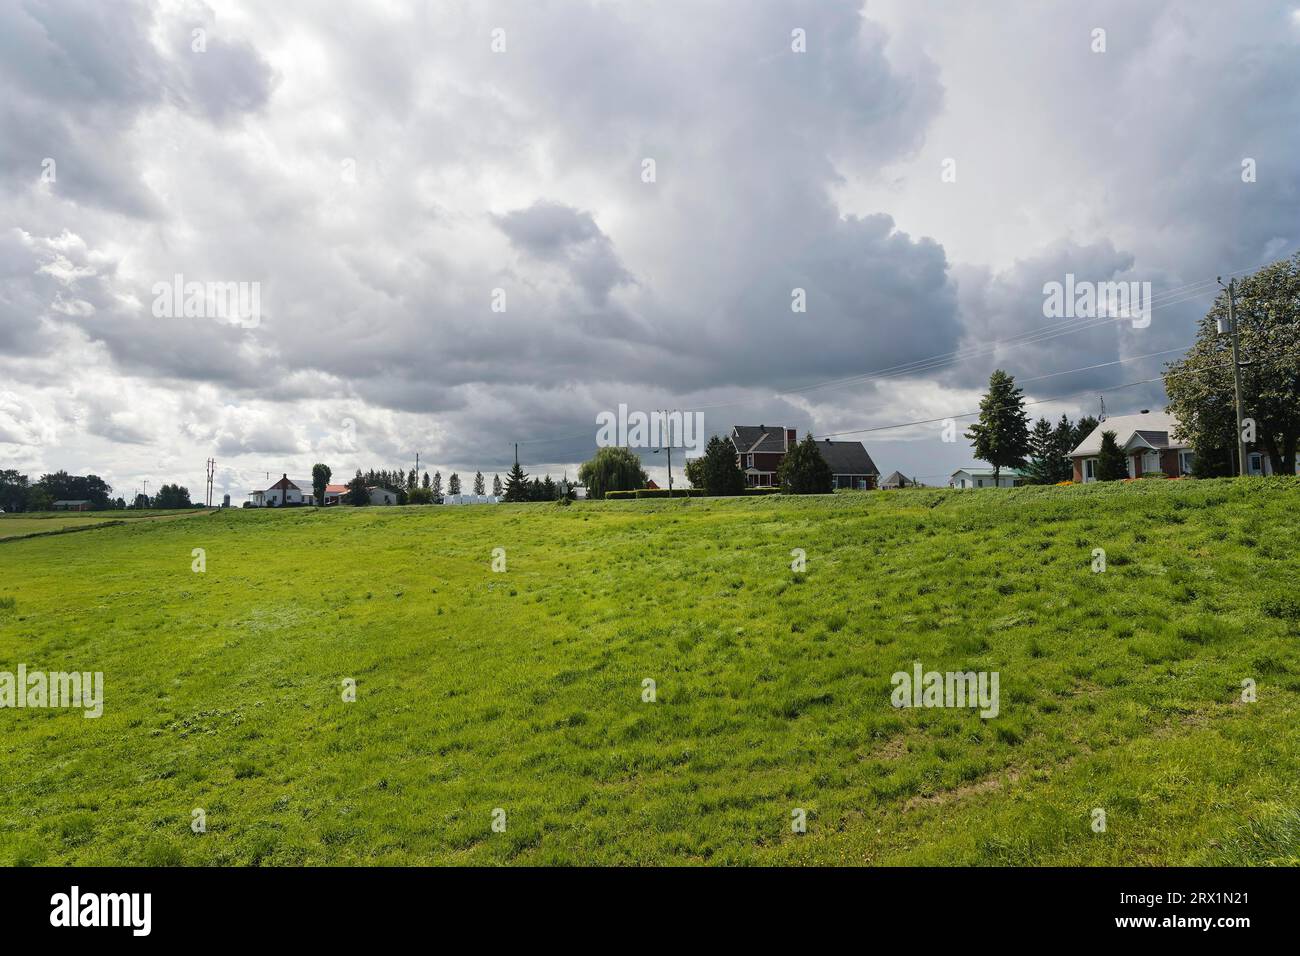 Agriculture, agricultural crop, farmland, Province of Quebec, Canada Stock Photo